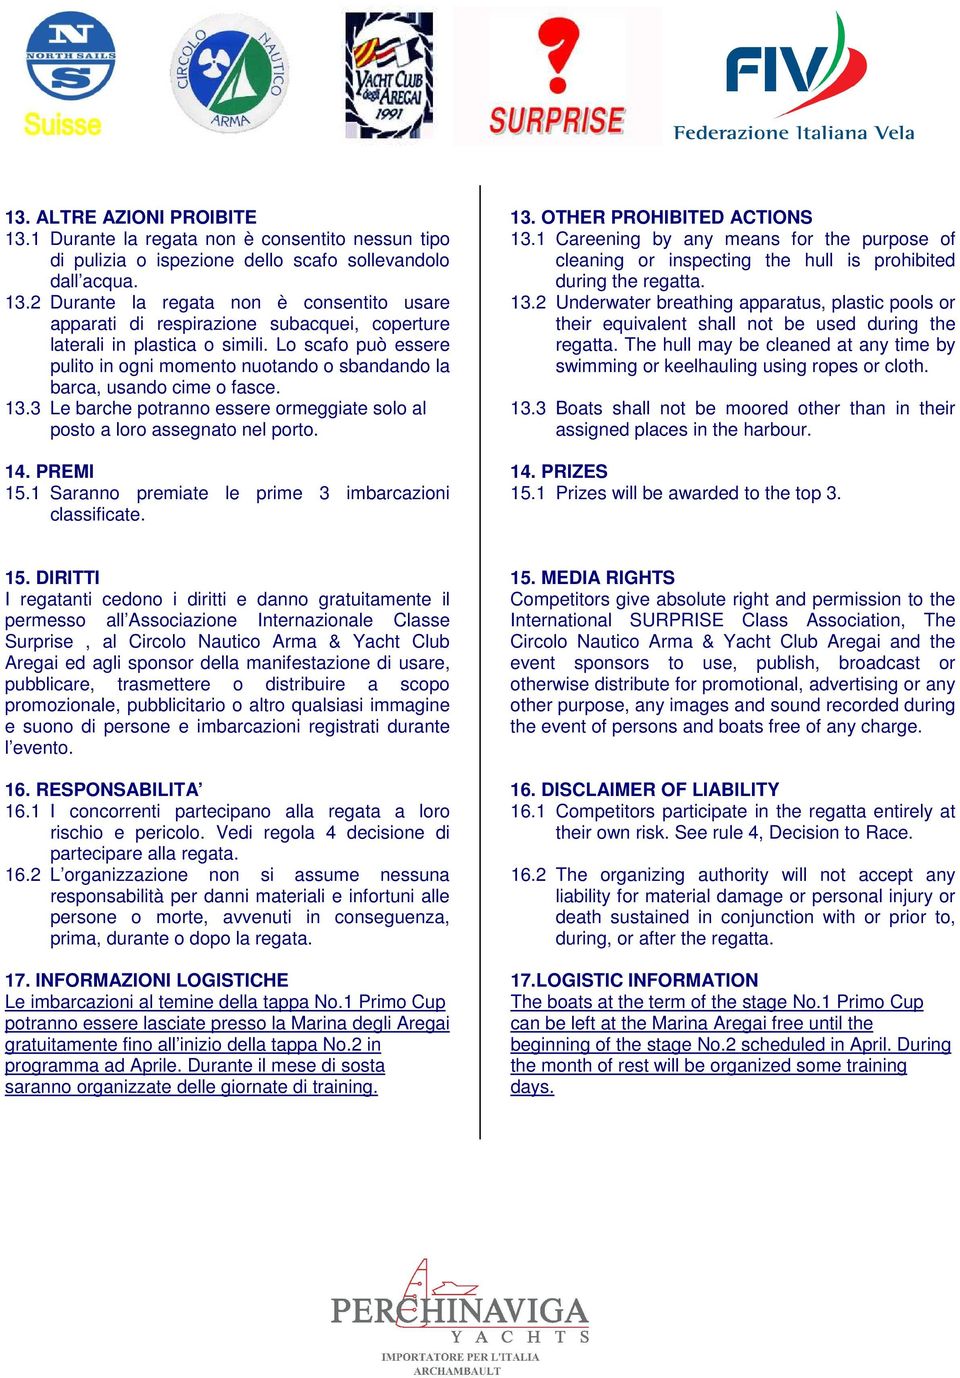 1 Saranno premiate le prime 3 imbarcazioni classificate. 13. OTHER PROHIBITED ACTIONS 13.1 Careening by any means for the purpose of cleaning or inspecting the hull is prohibited during the regatta.